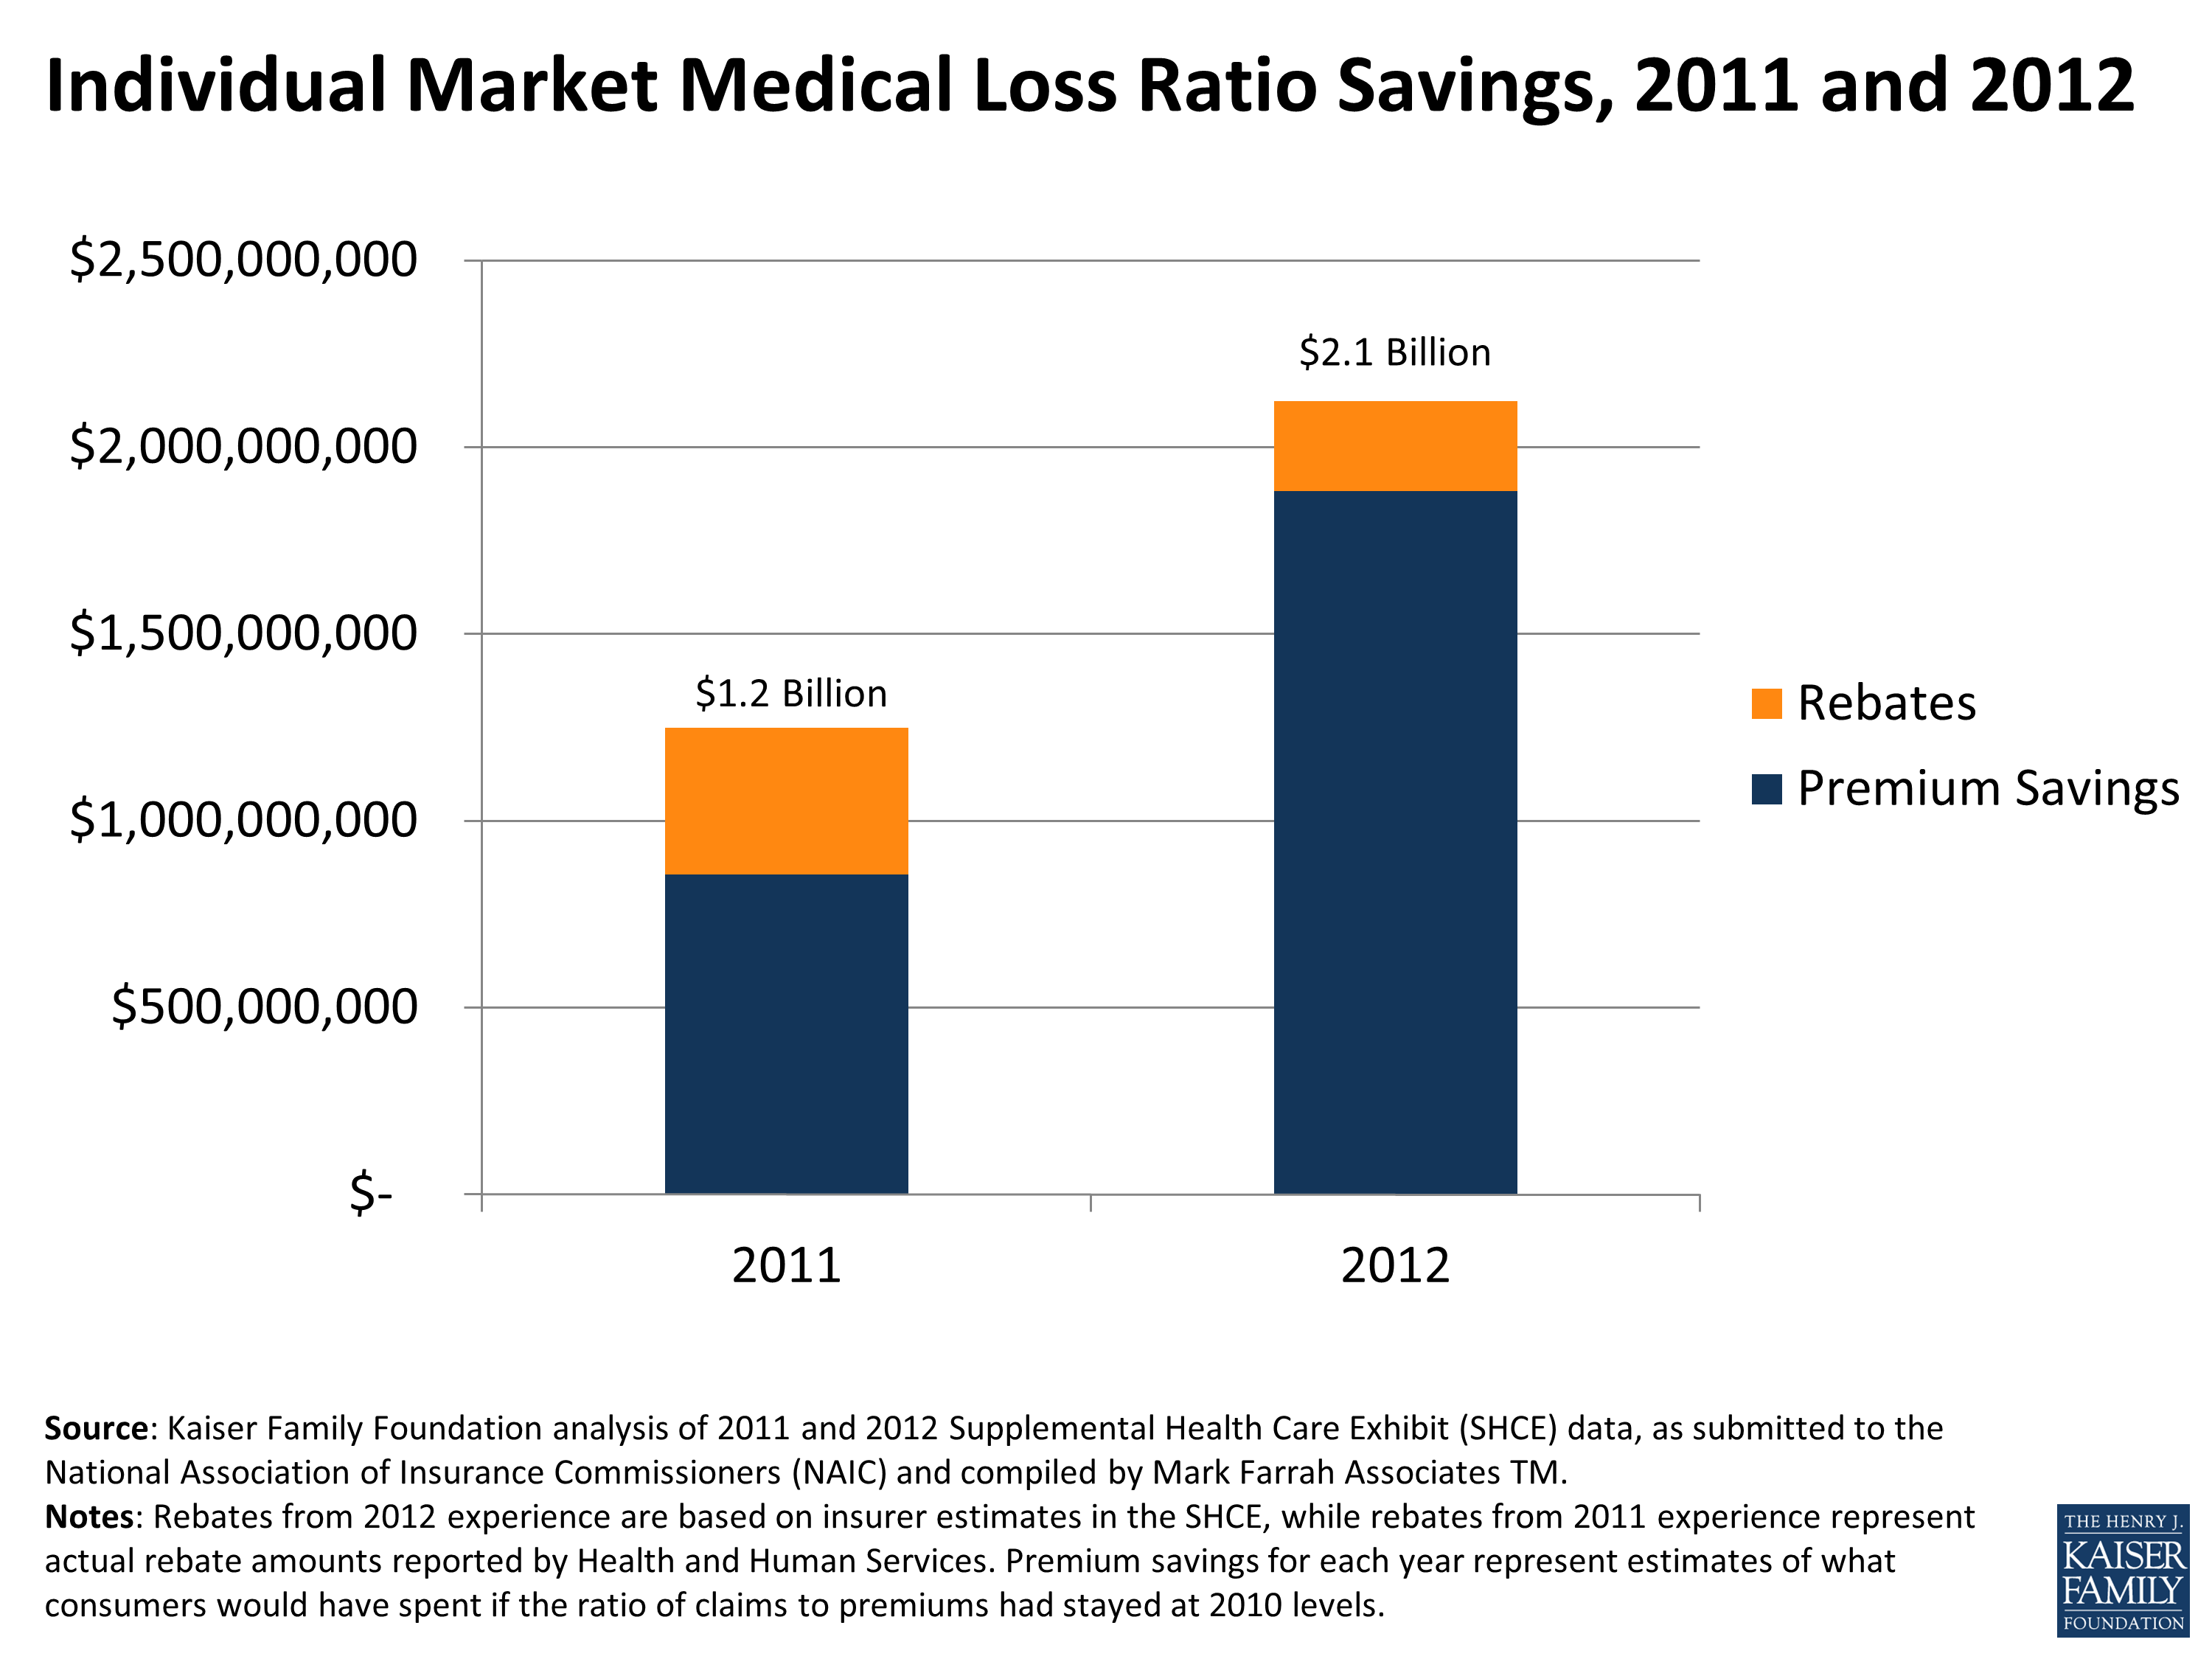 beyond-rebates-how-much-are-consumers-saving-from-the-aca-s-medical-loss-ratio-provision-kff